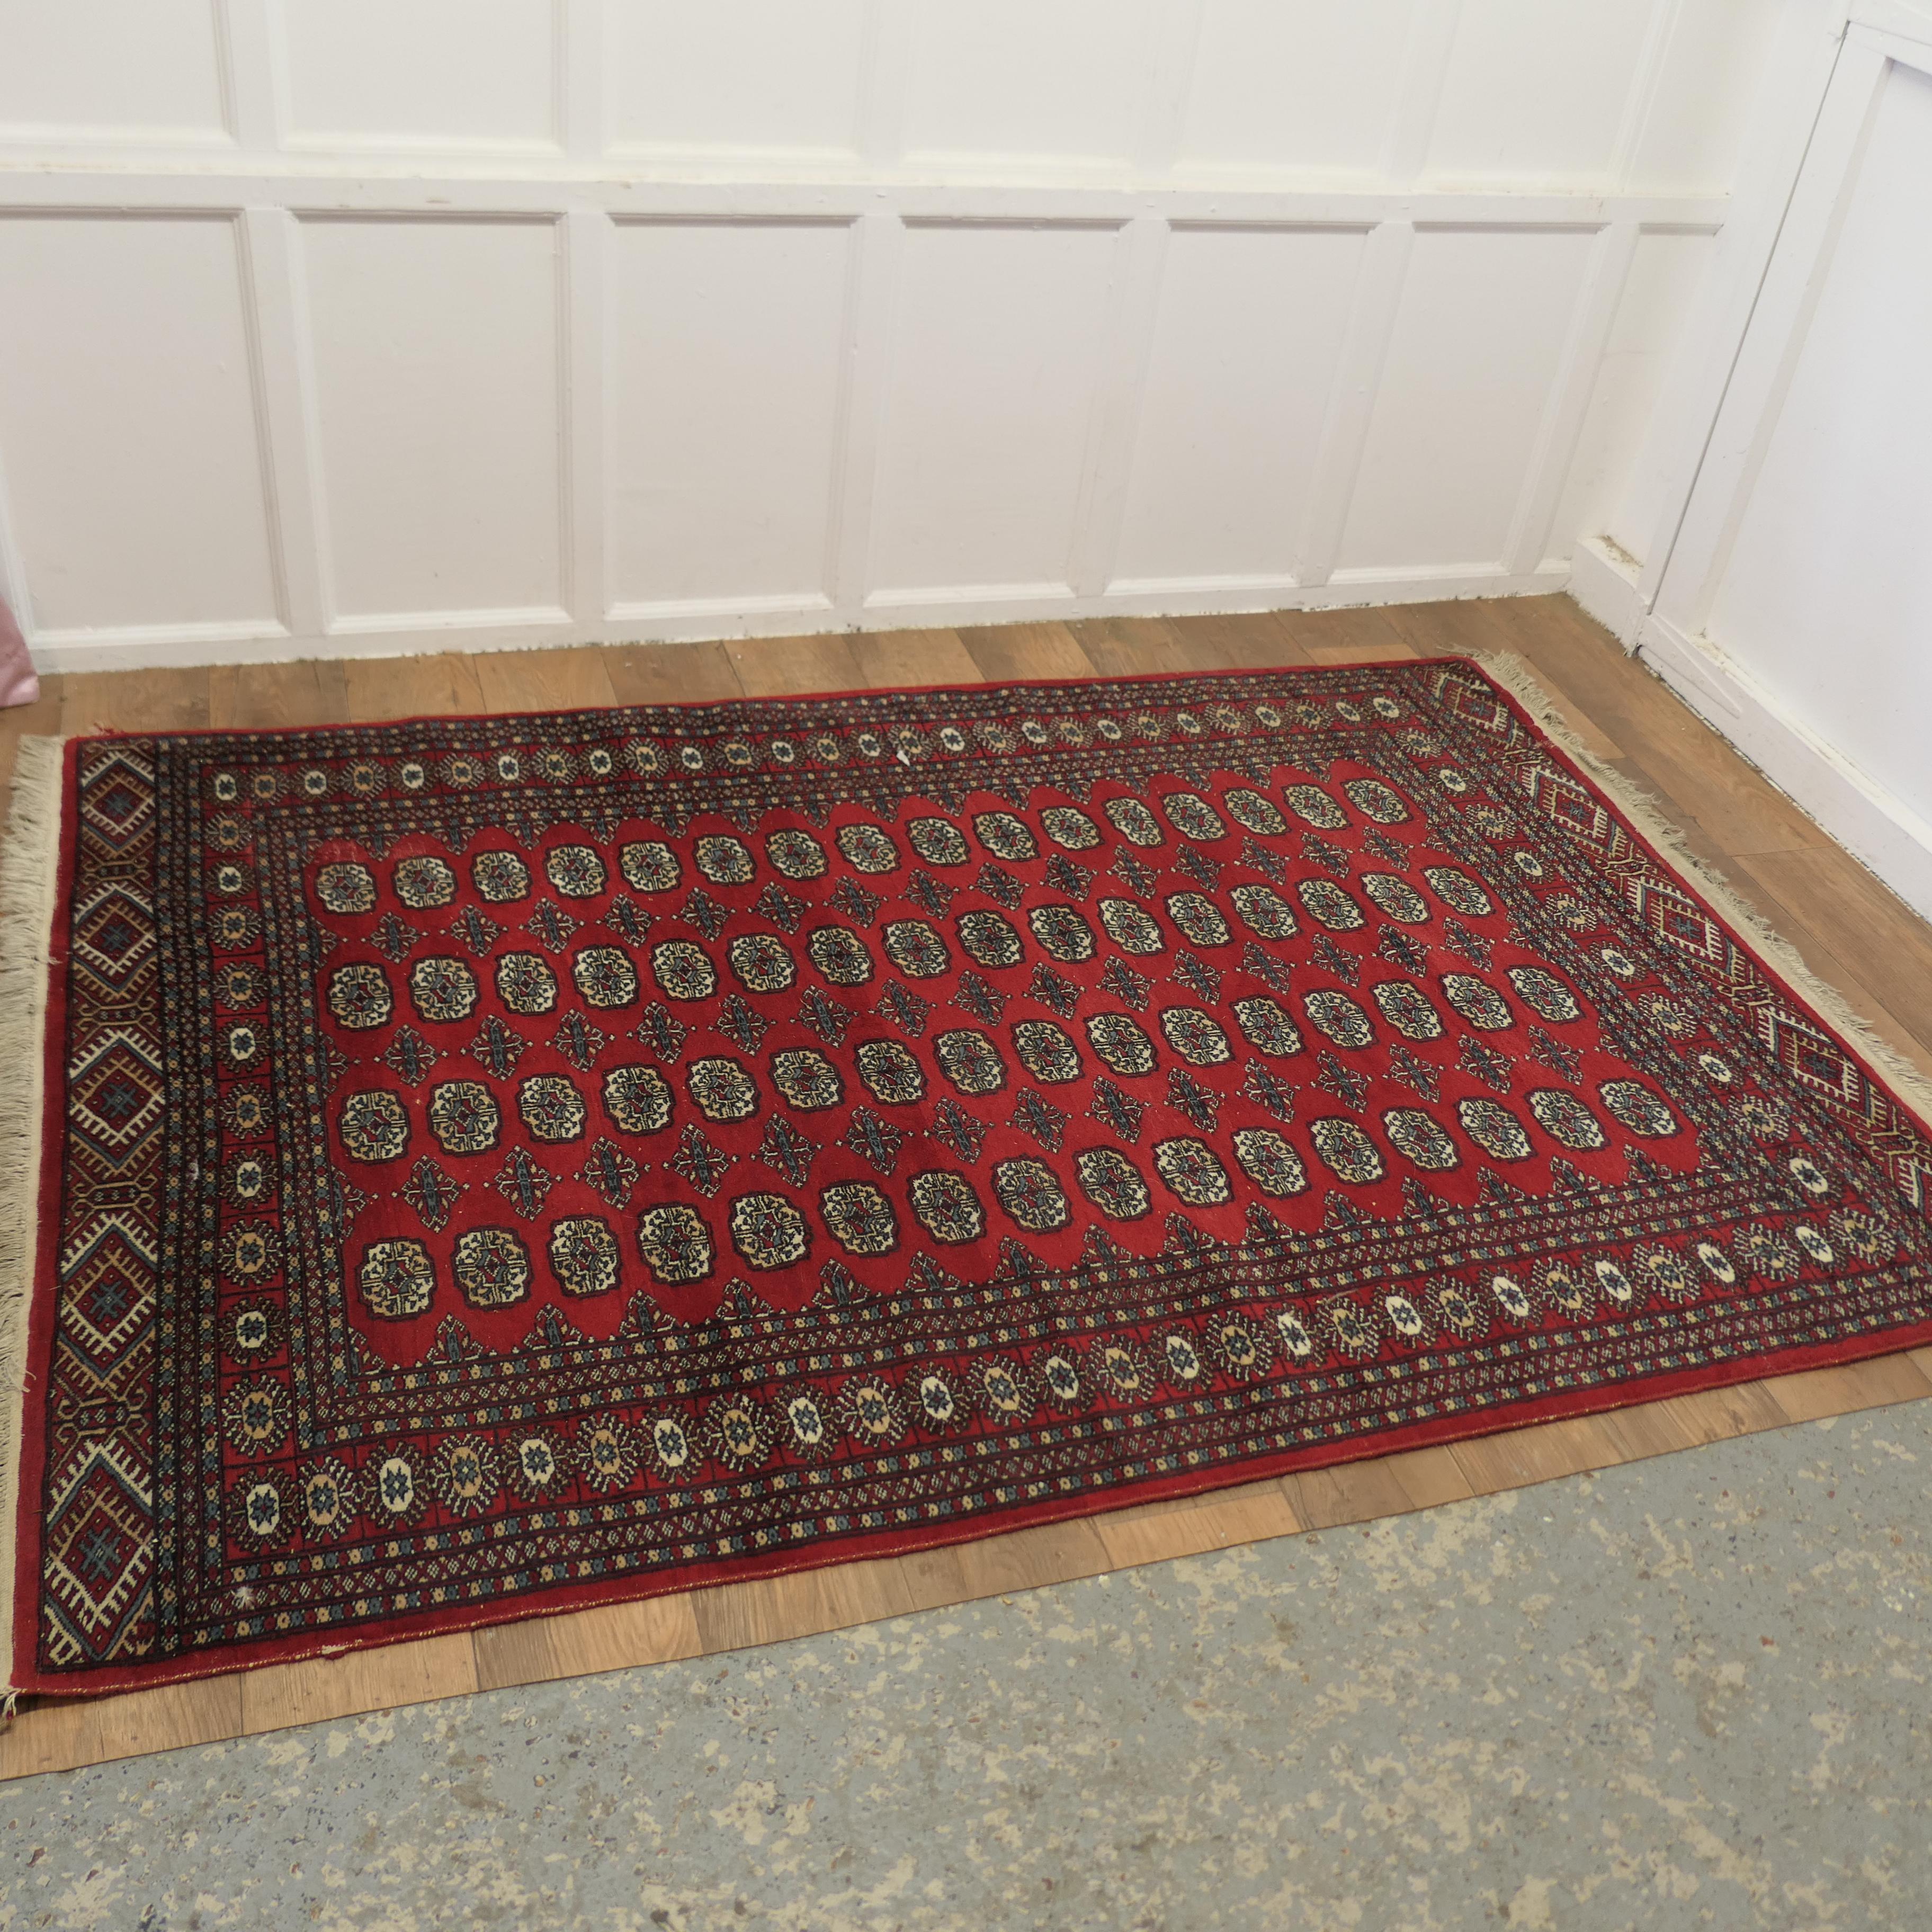 A Lovely Bright Red Wool Rug  The Carpet is a wonderful Bright colour   For Sale 3